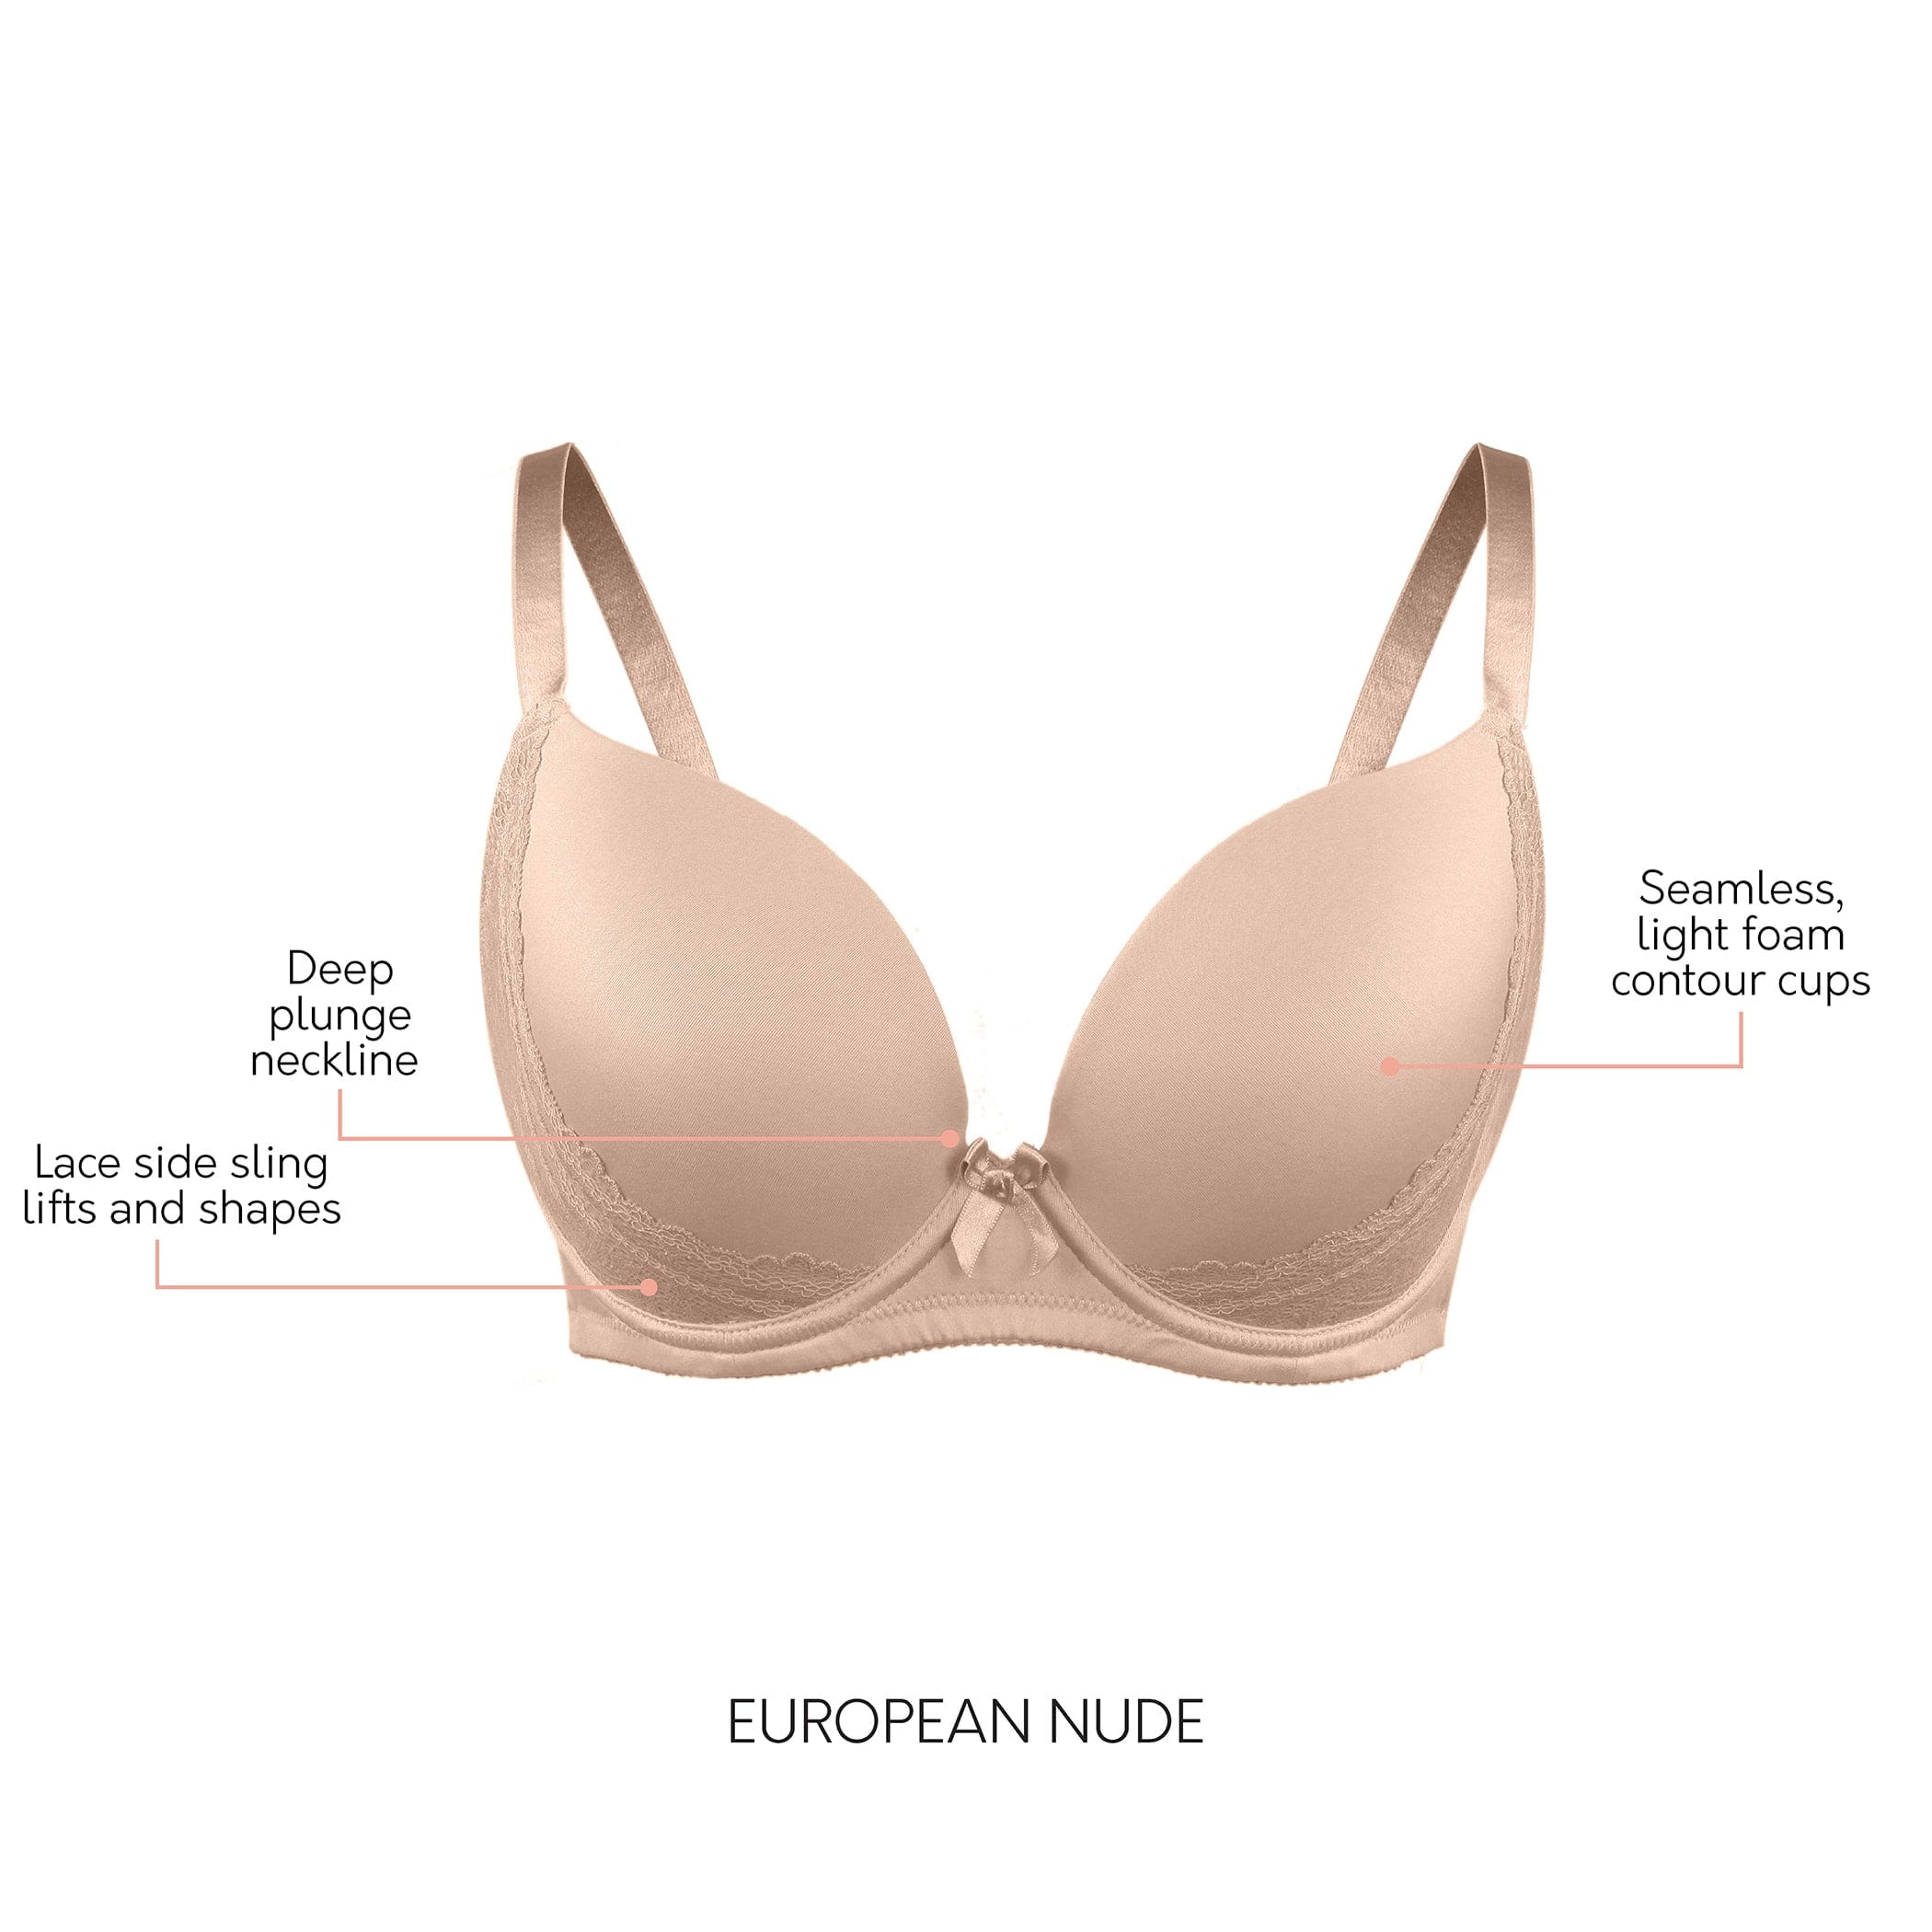 Freya Deco Underwire Molded Plunge Bra in Nude - Busted Bra Shop